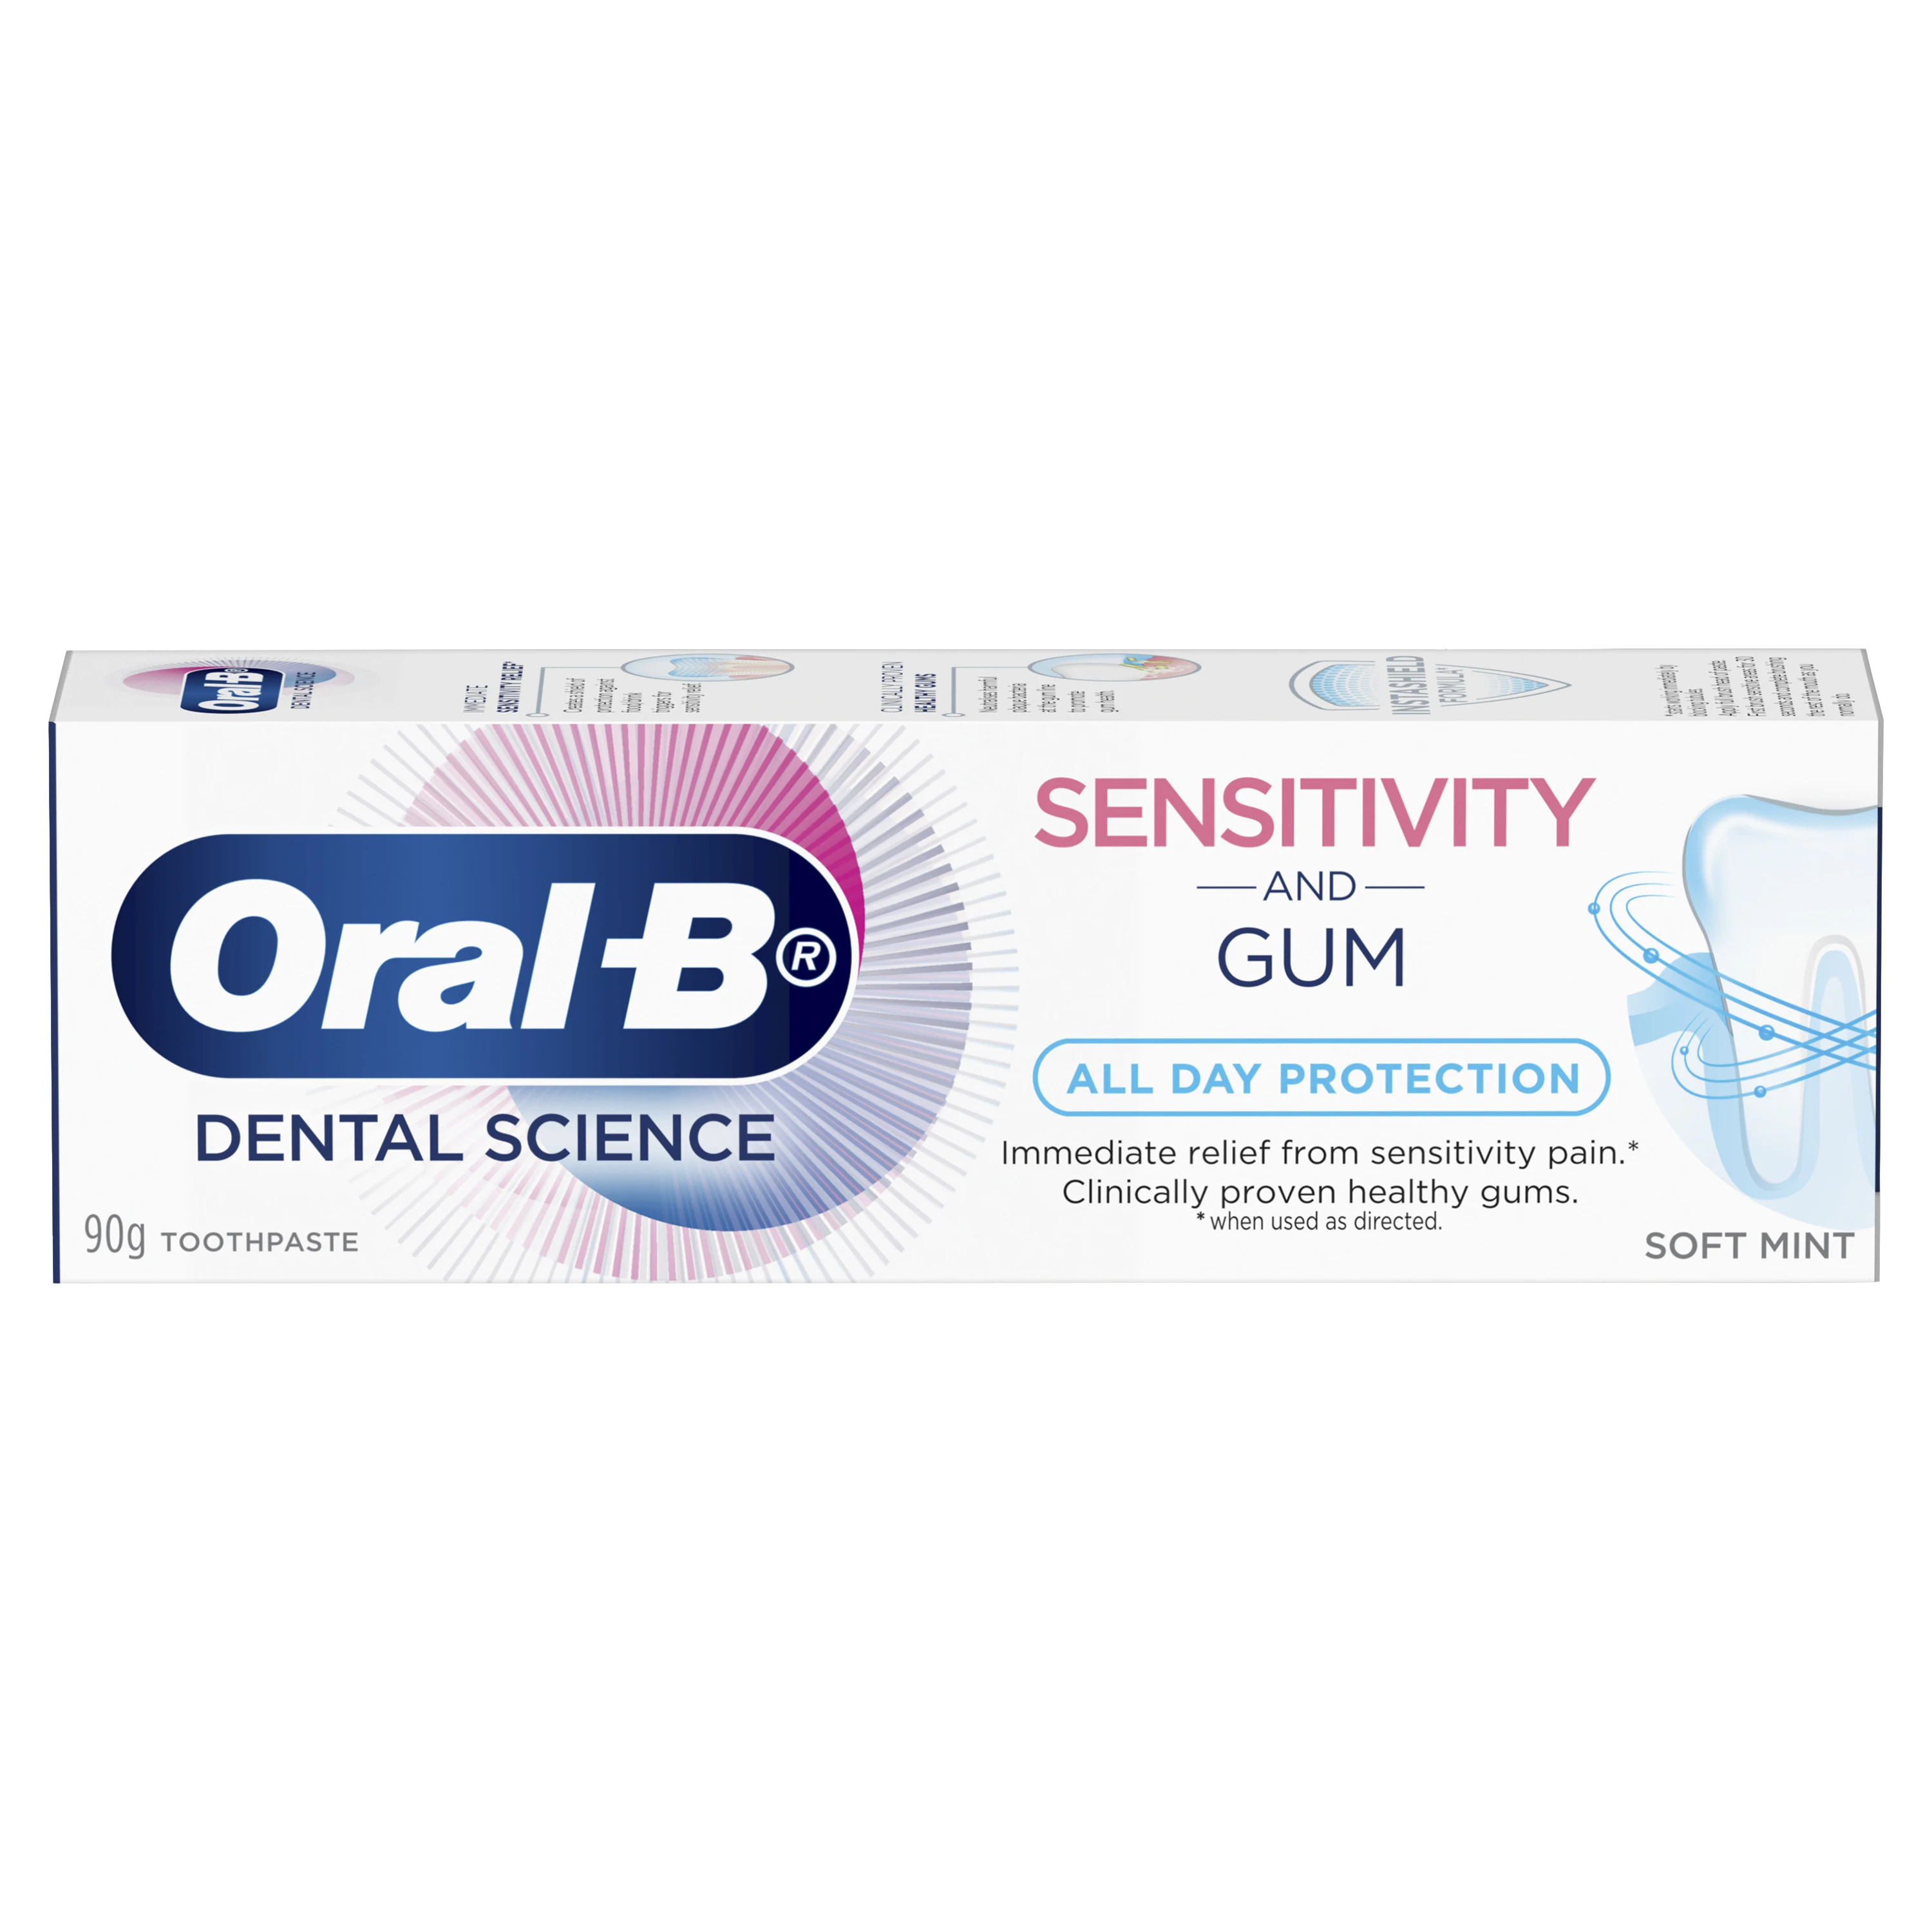 Oral-B Dental Science Sensitivity and Gum All Day Protection 